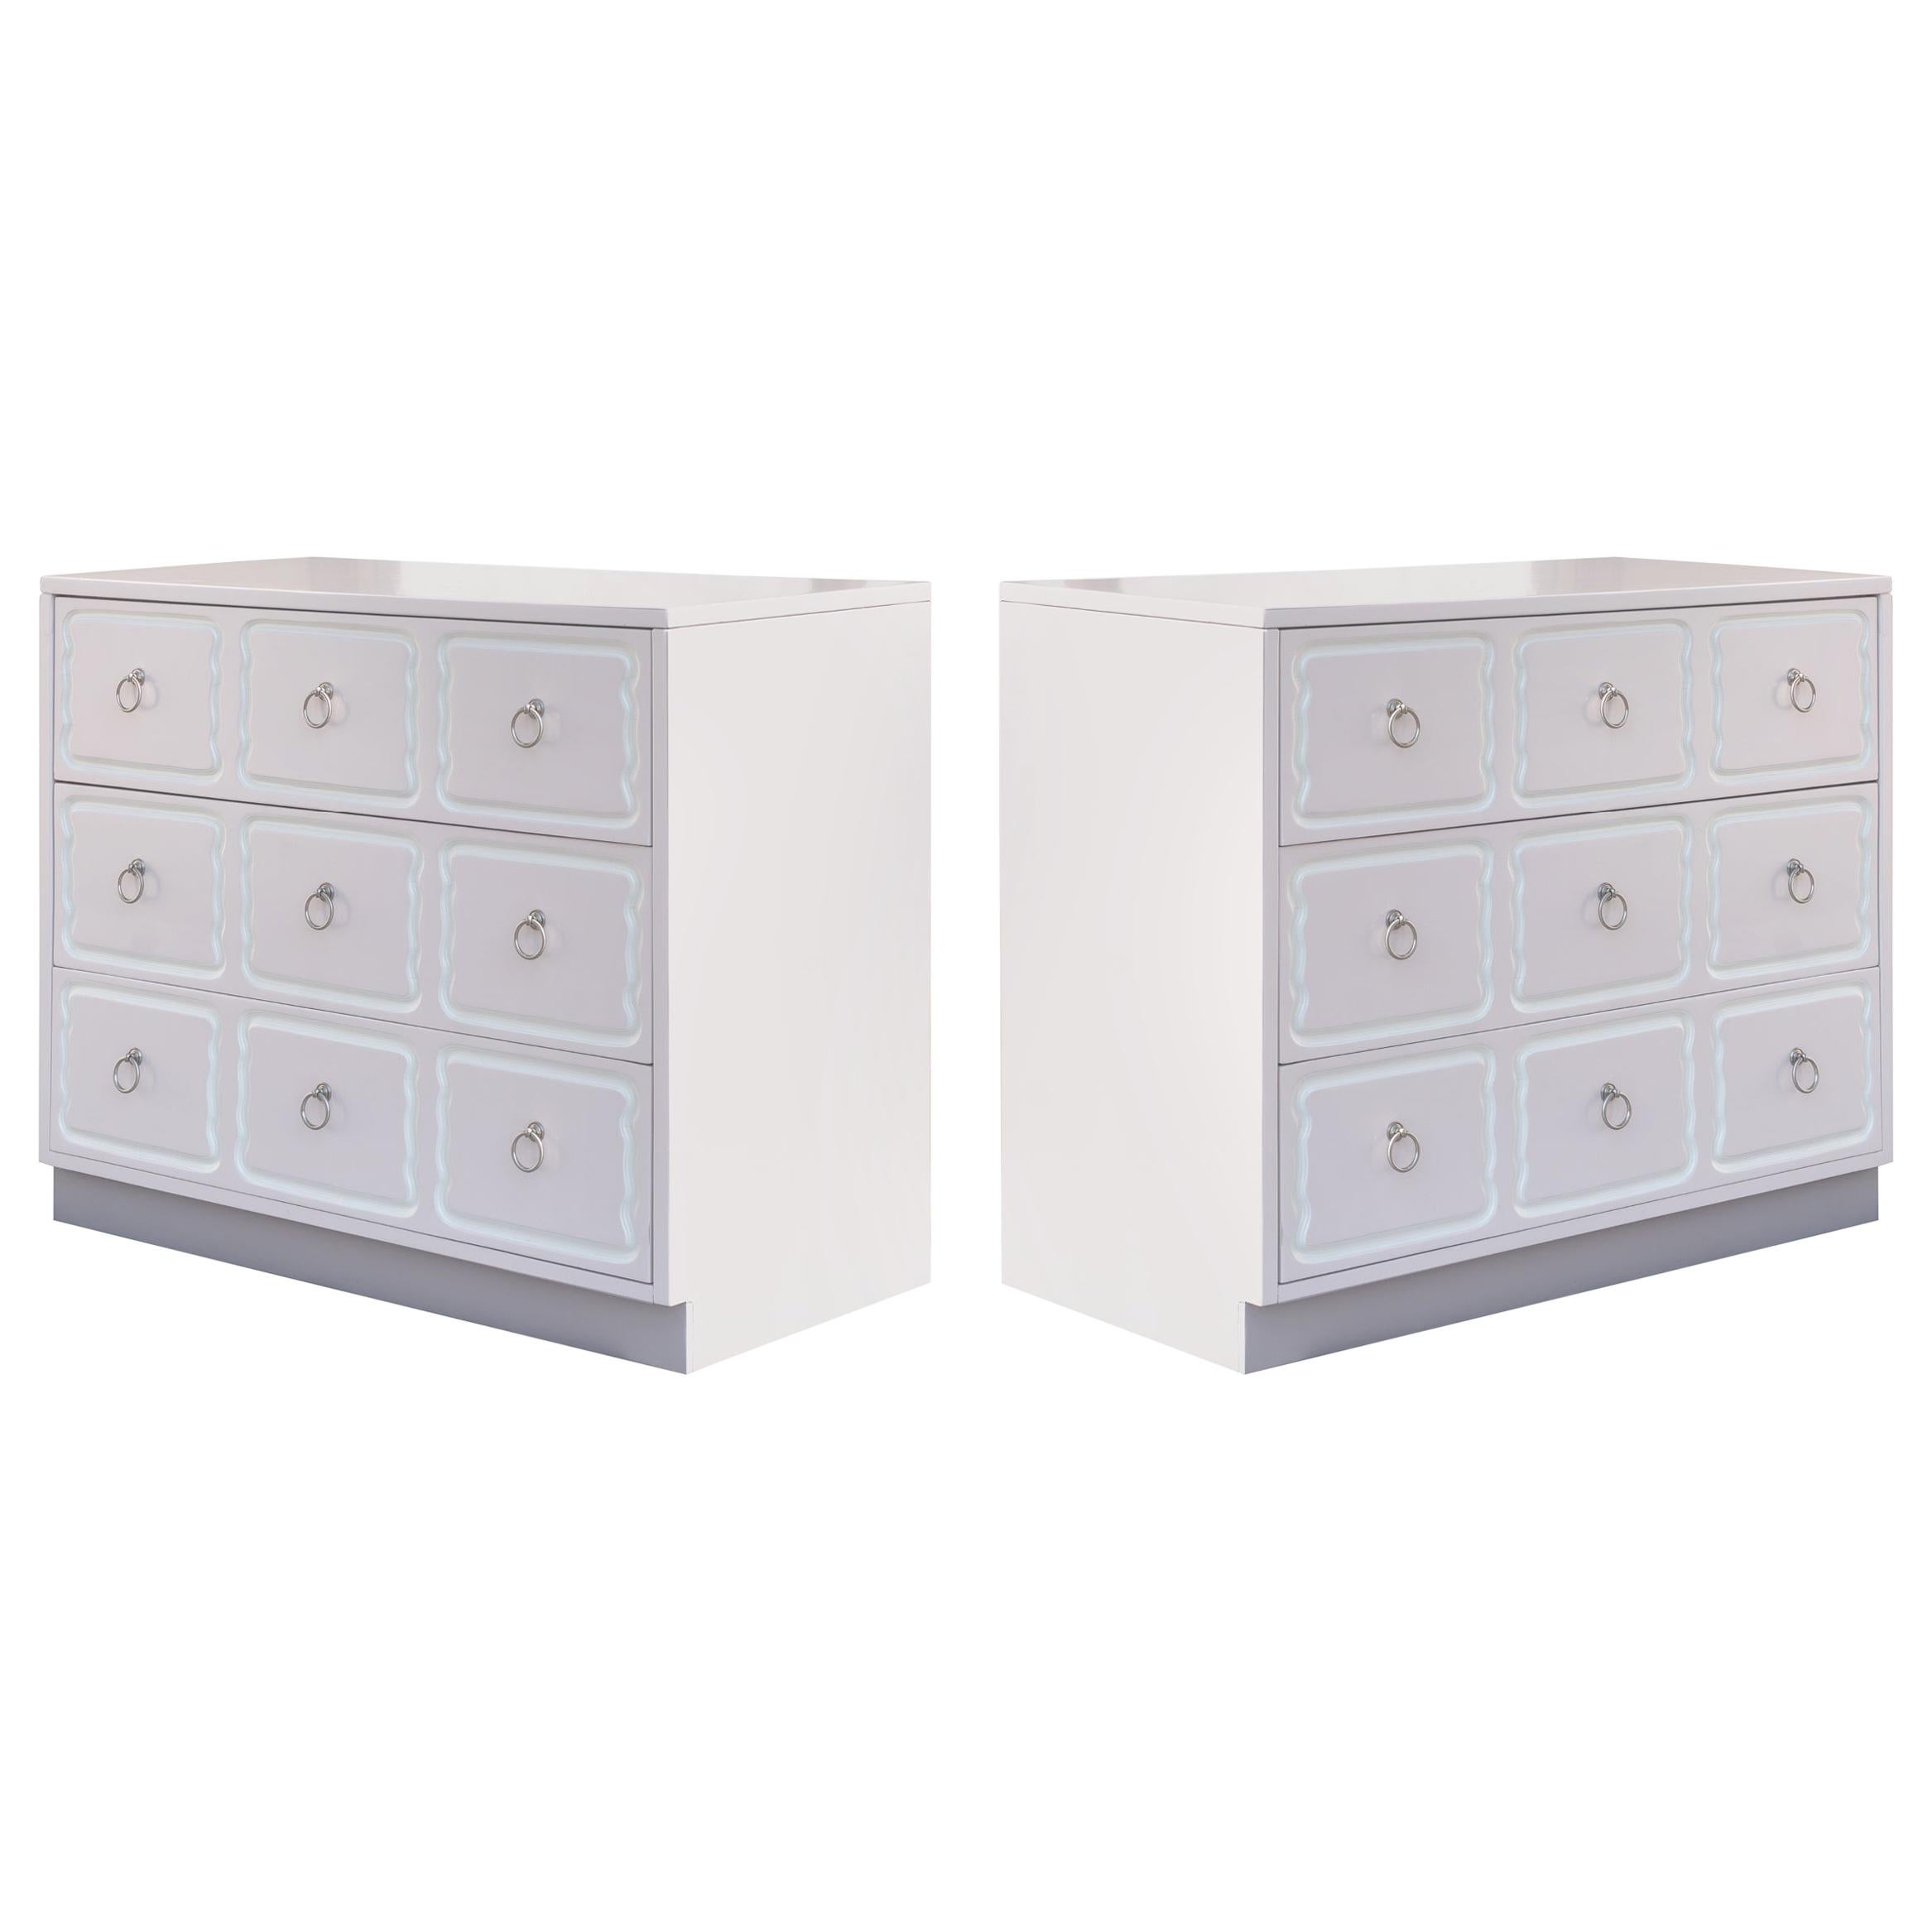 Dorothy Draper Style 3-Drawer Dressers in Soft Pink with Nickel Pulls, Pair